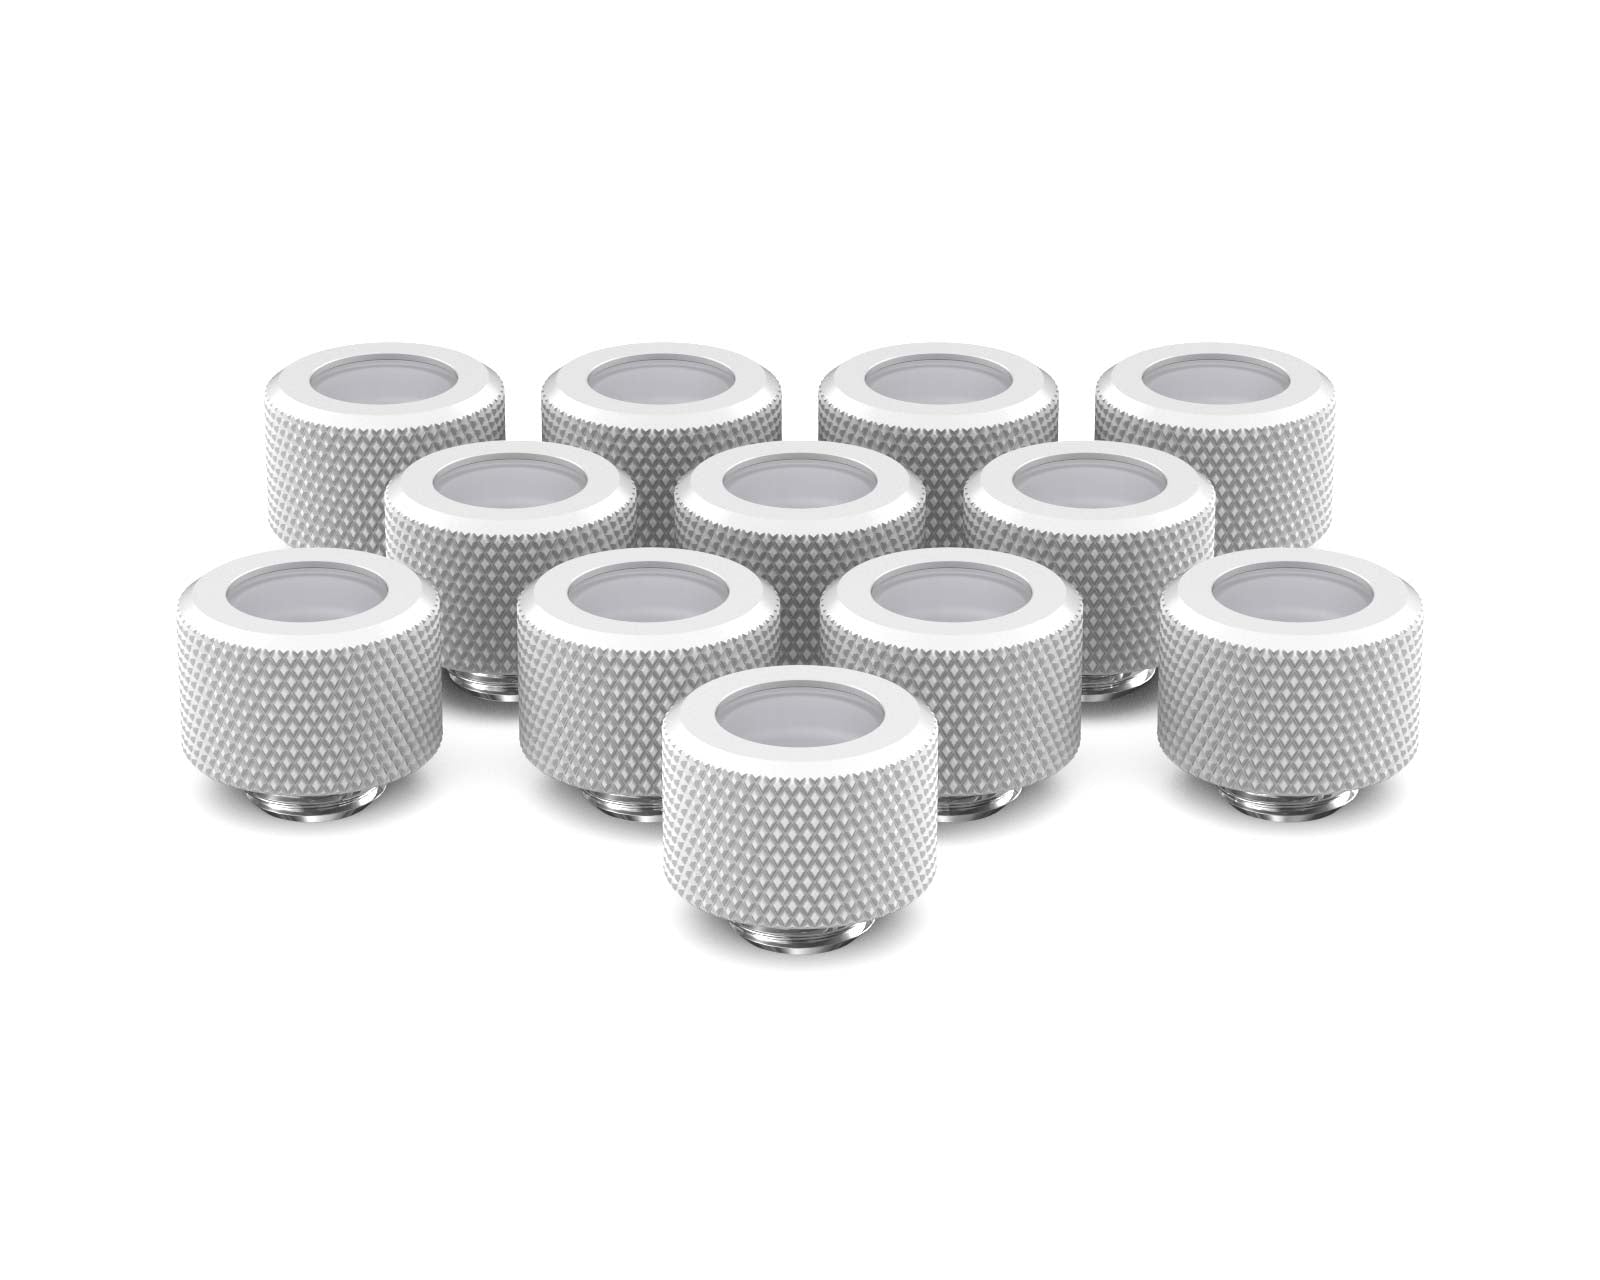 PrimoChill 14mm OD Rigid SX Fitting - 12 Pack - PrimoChill - KEEPING IT COOL Sky White